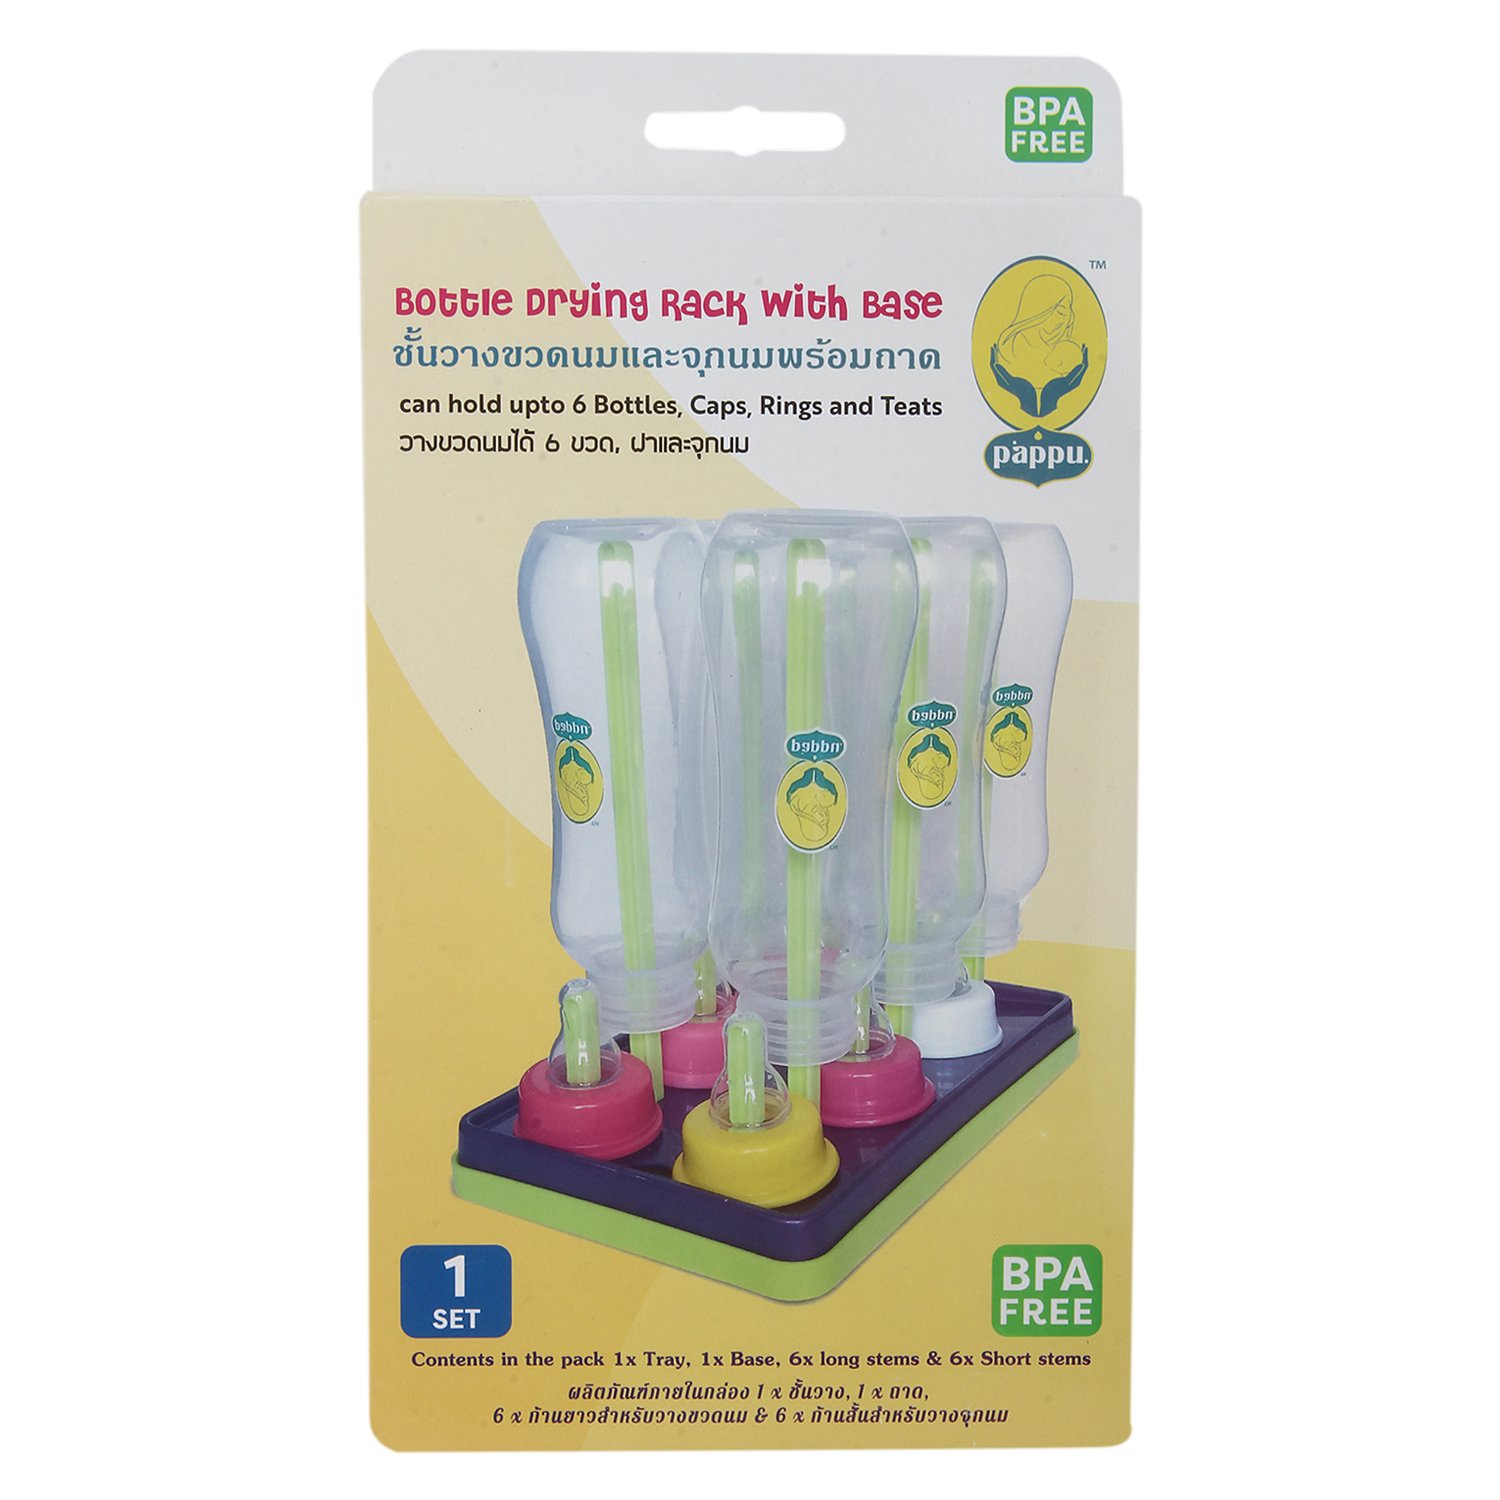 Bottle drying rack with base can Contain 6 Bottles